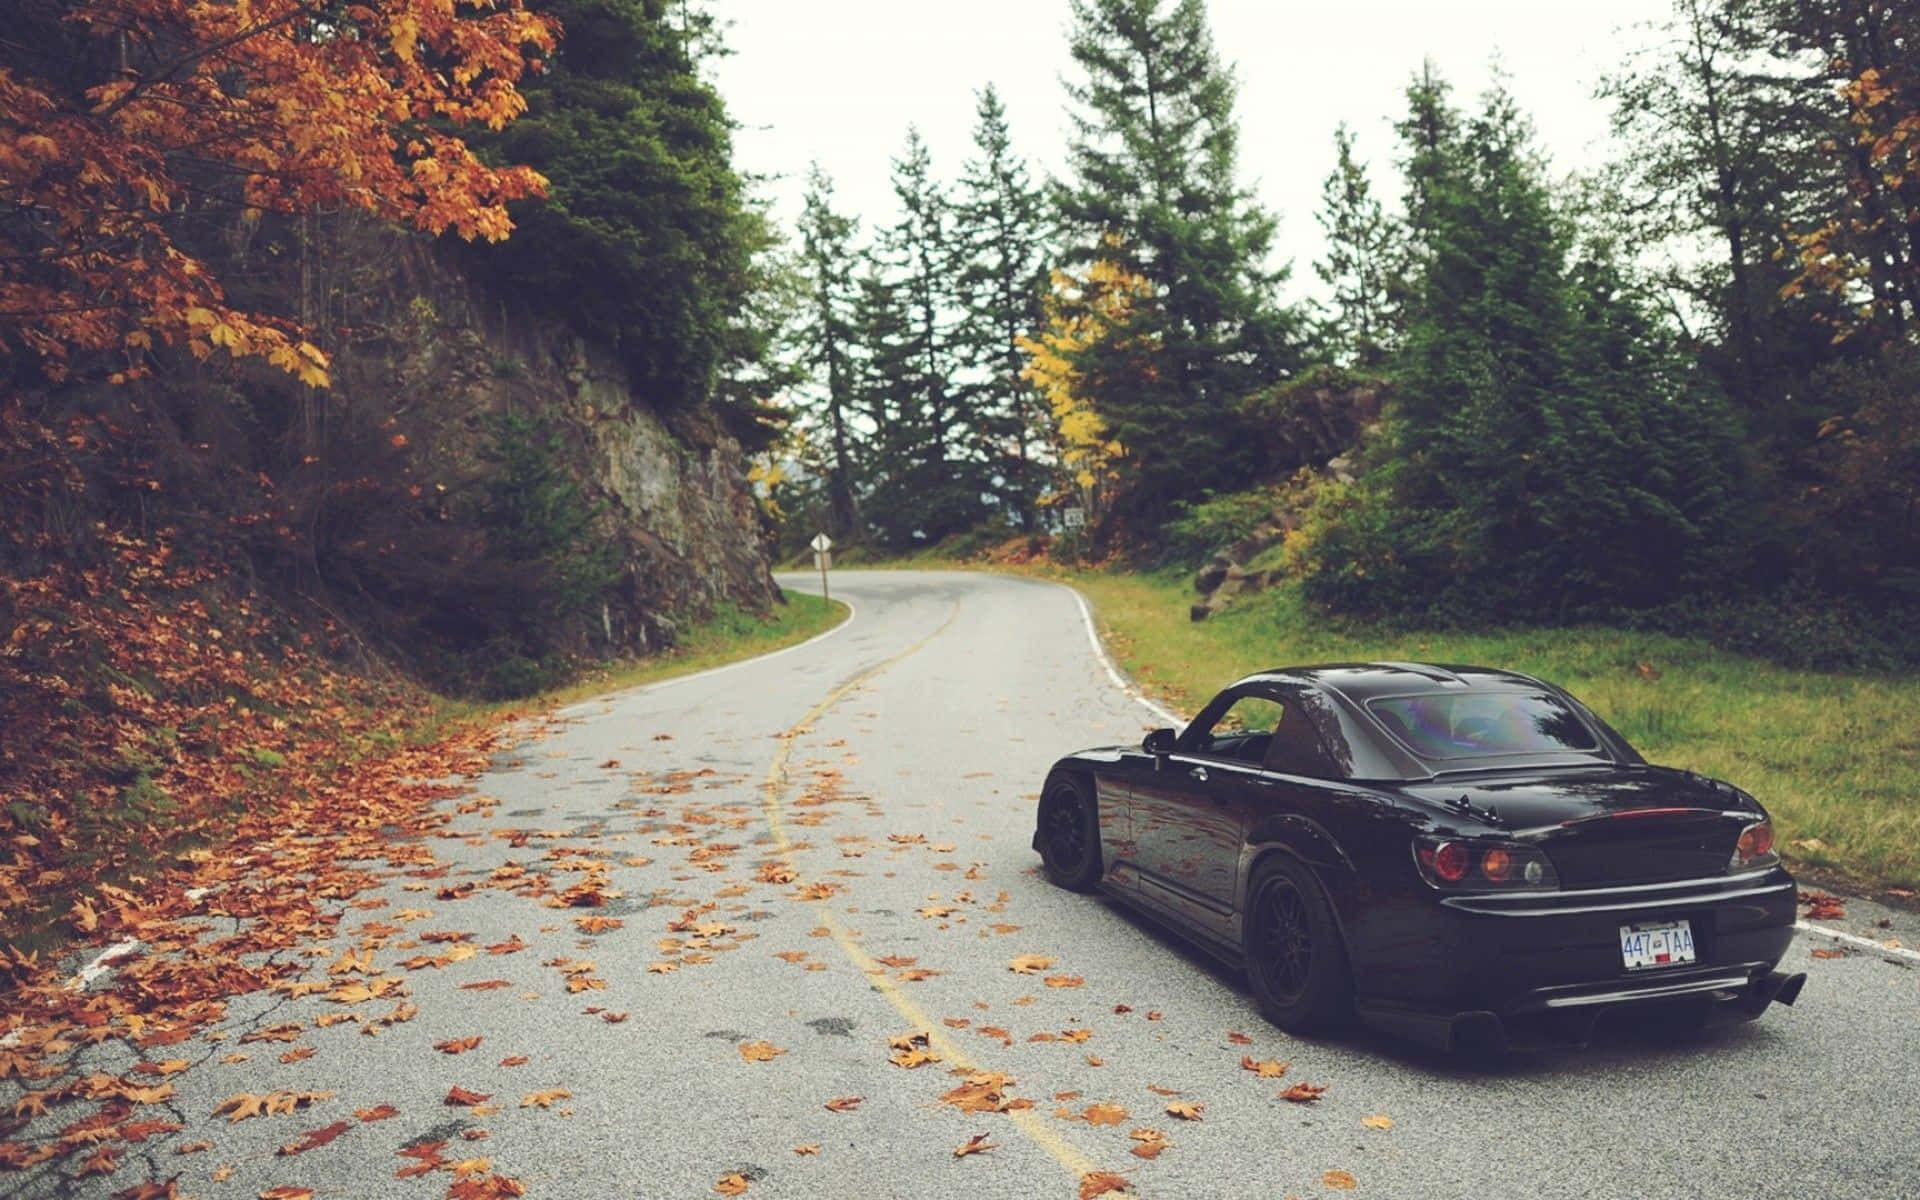 A Black Sports Car Parked On A Road With Leaves